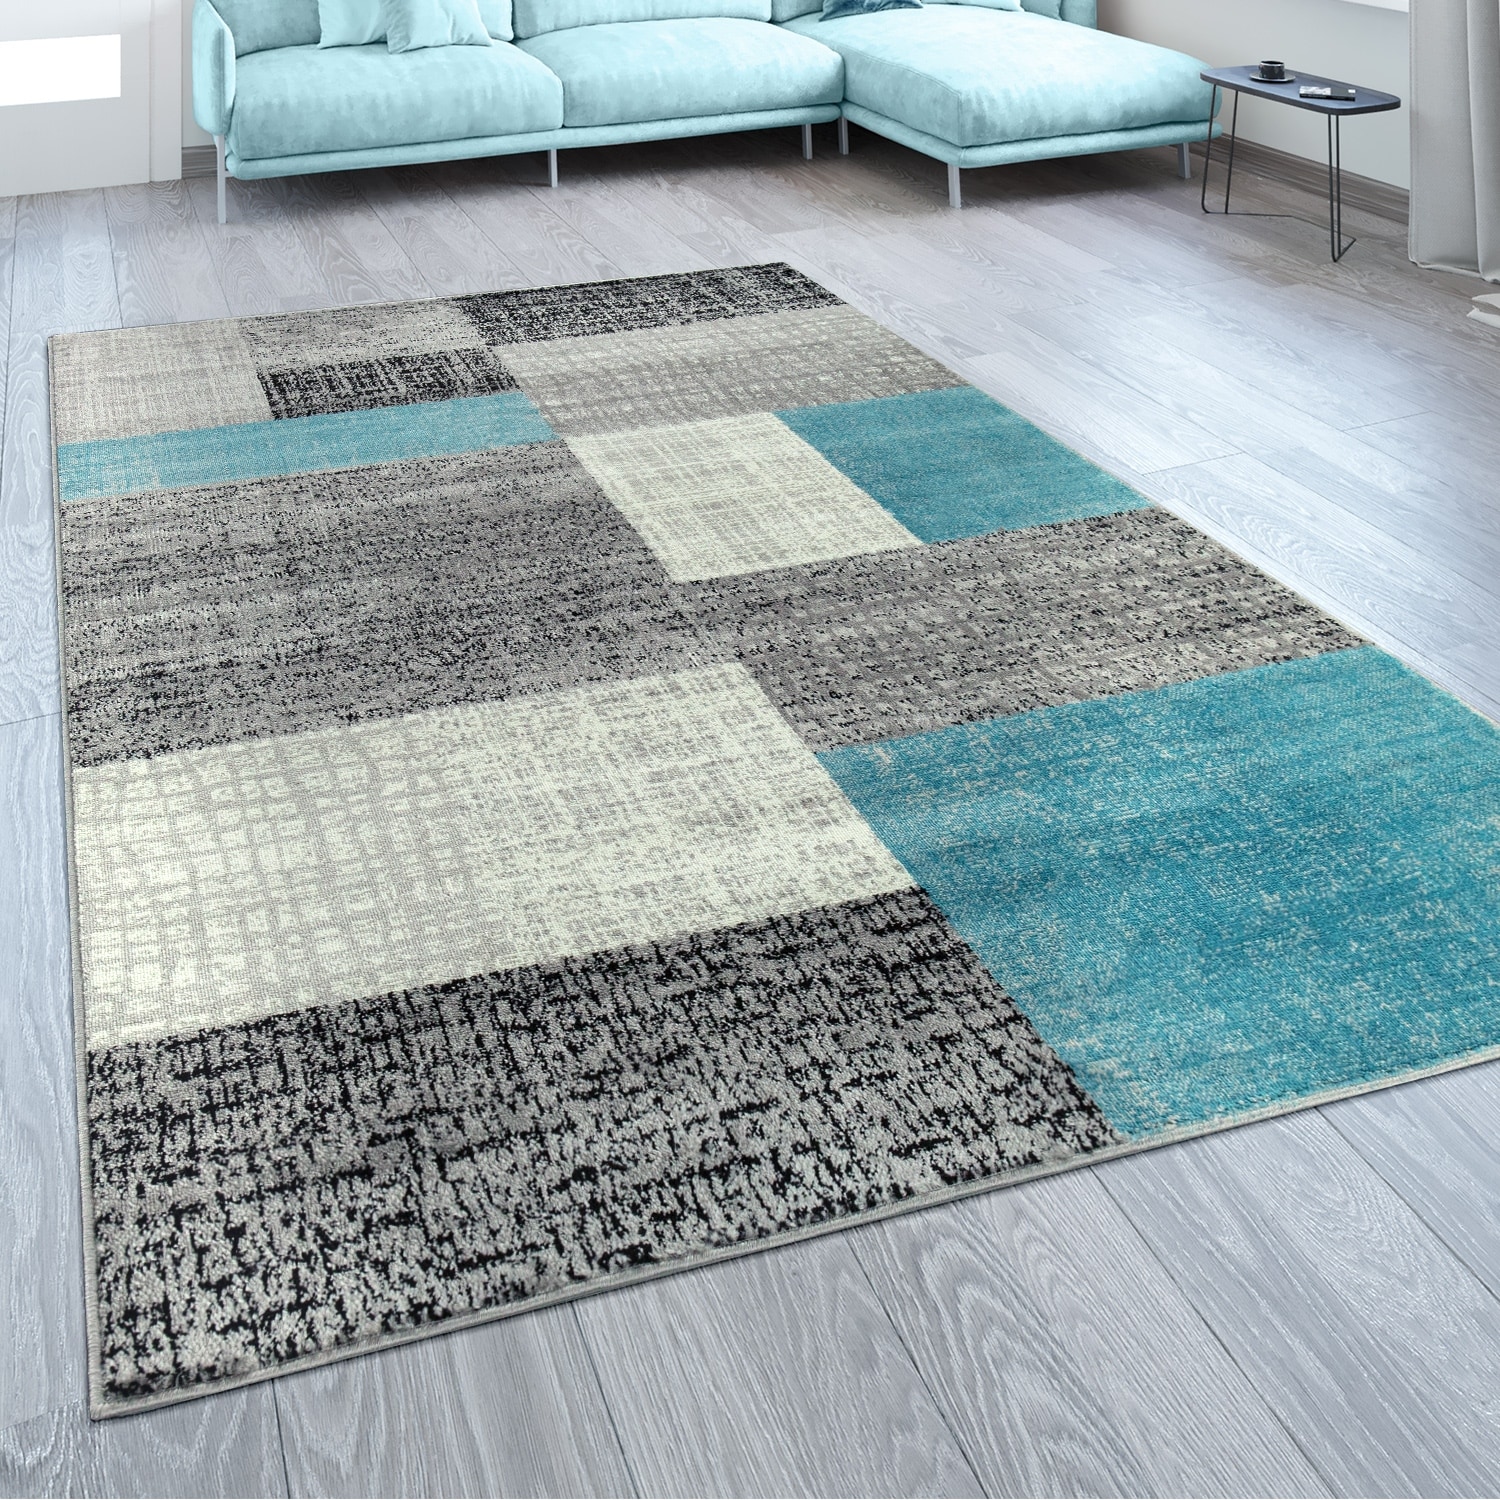 Paco Home Soft Washable Area Rug Anti-Slip in Solid Black, Size: 5'3 x 7'3